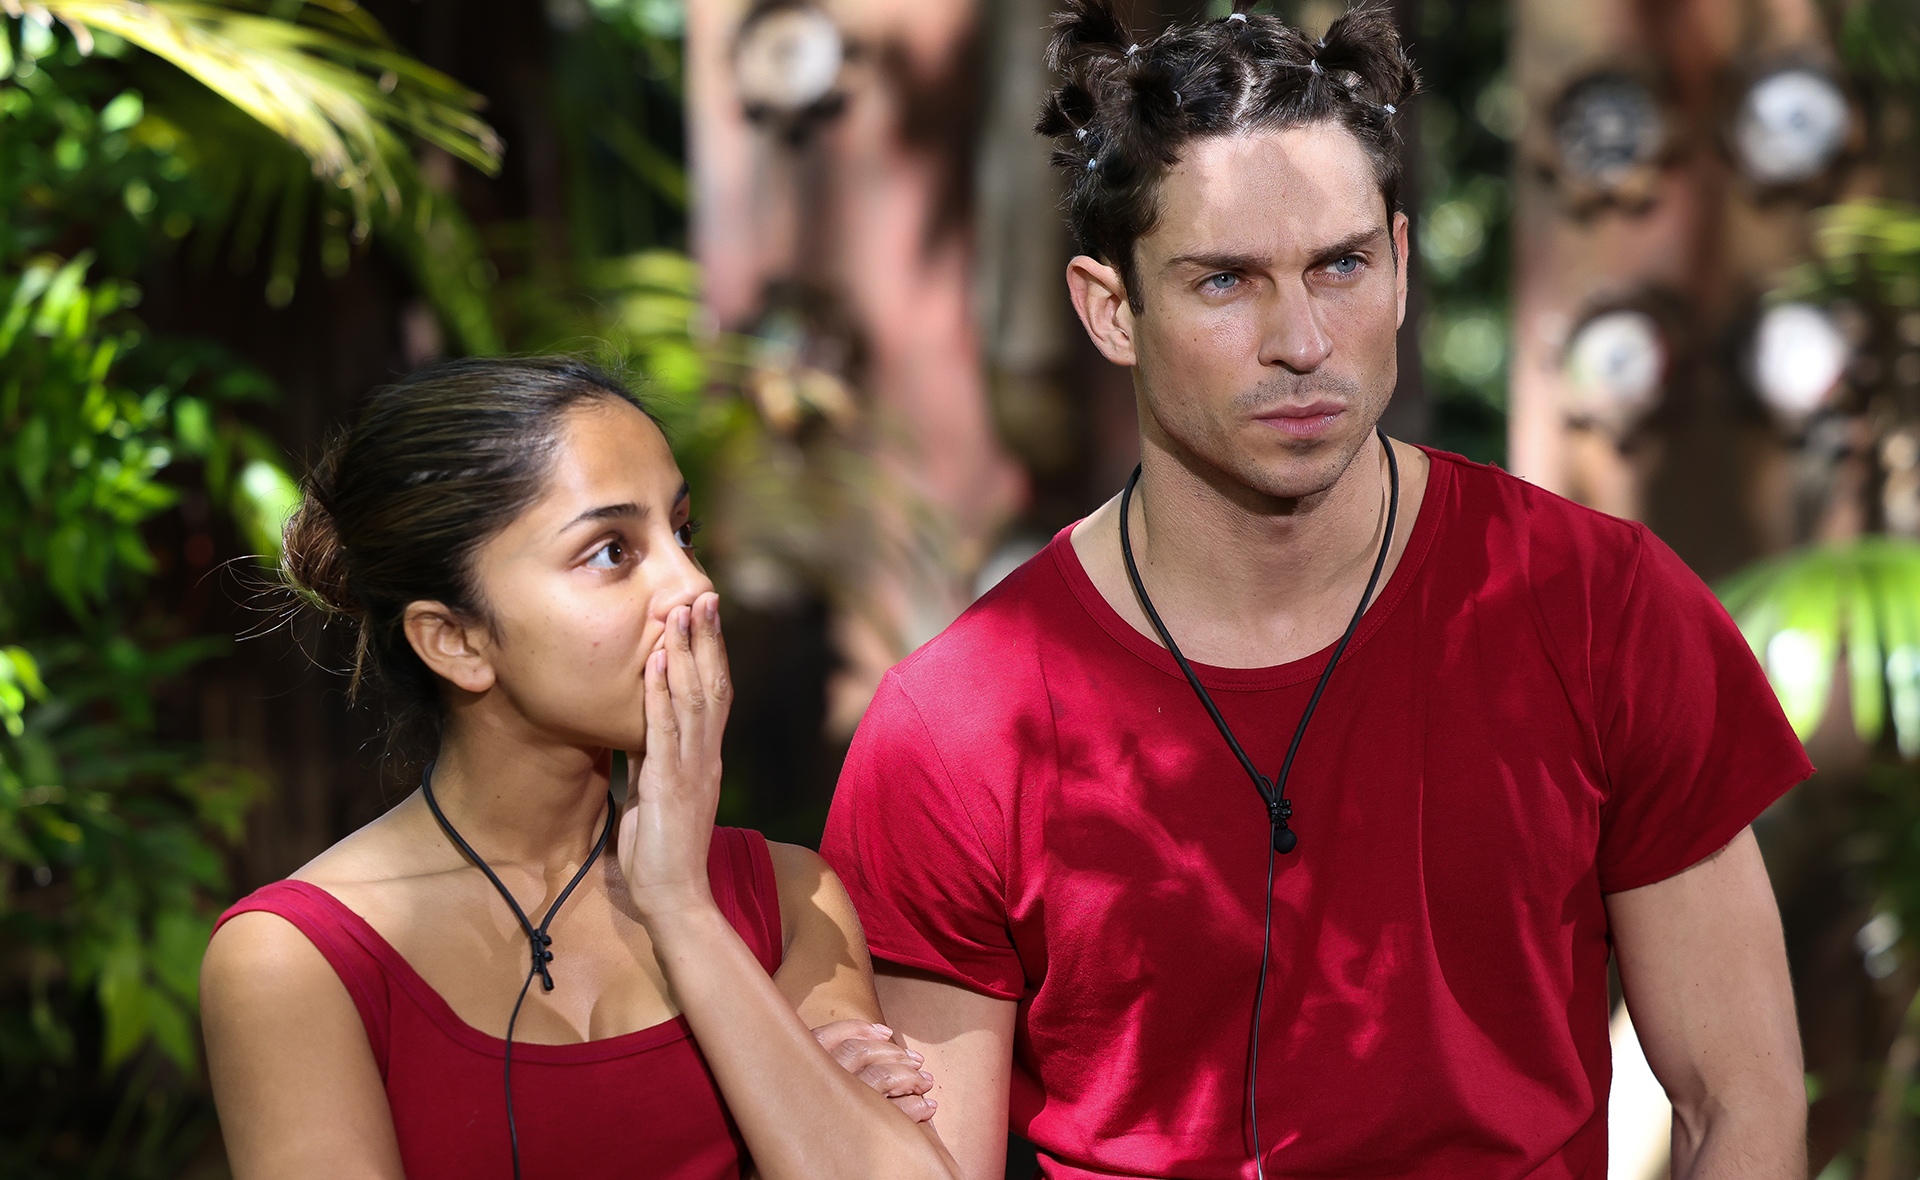 EXCLUSIVE: Maria Thattil thought her romance with Joey Essex was over in this terrifying moment on I’m A Celebrity… Get Me Out Of Here!